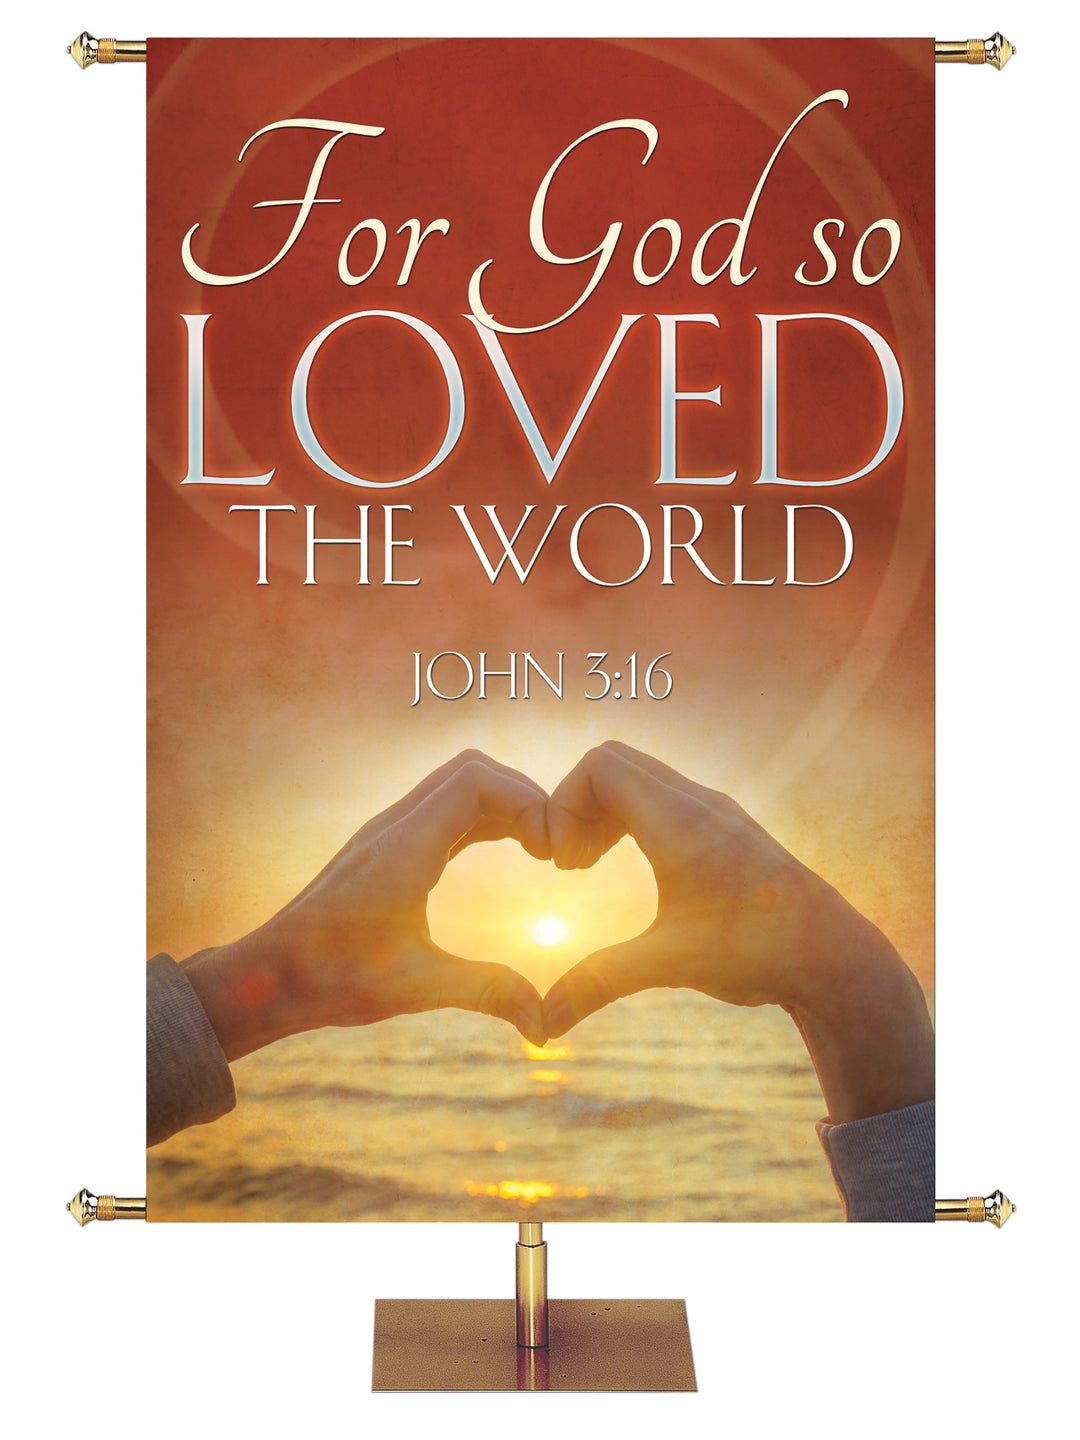 Expressions of Love For God So Loved the World - Year Round Banners - PraiseBanners